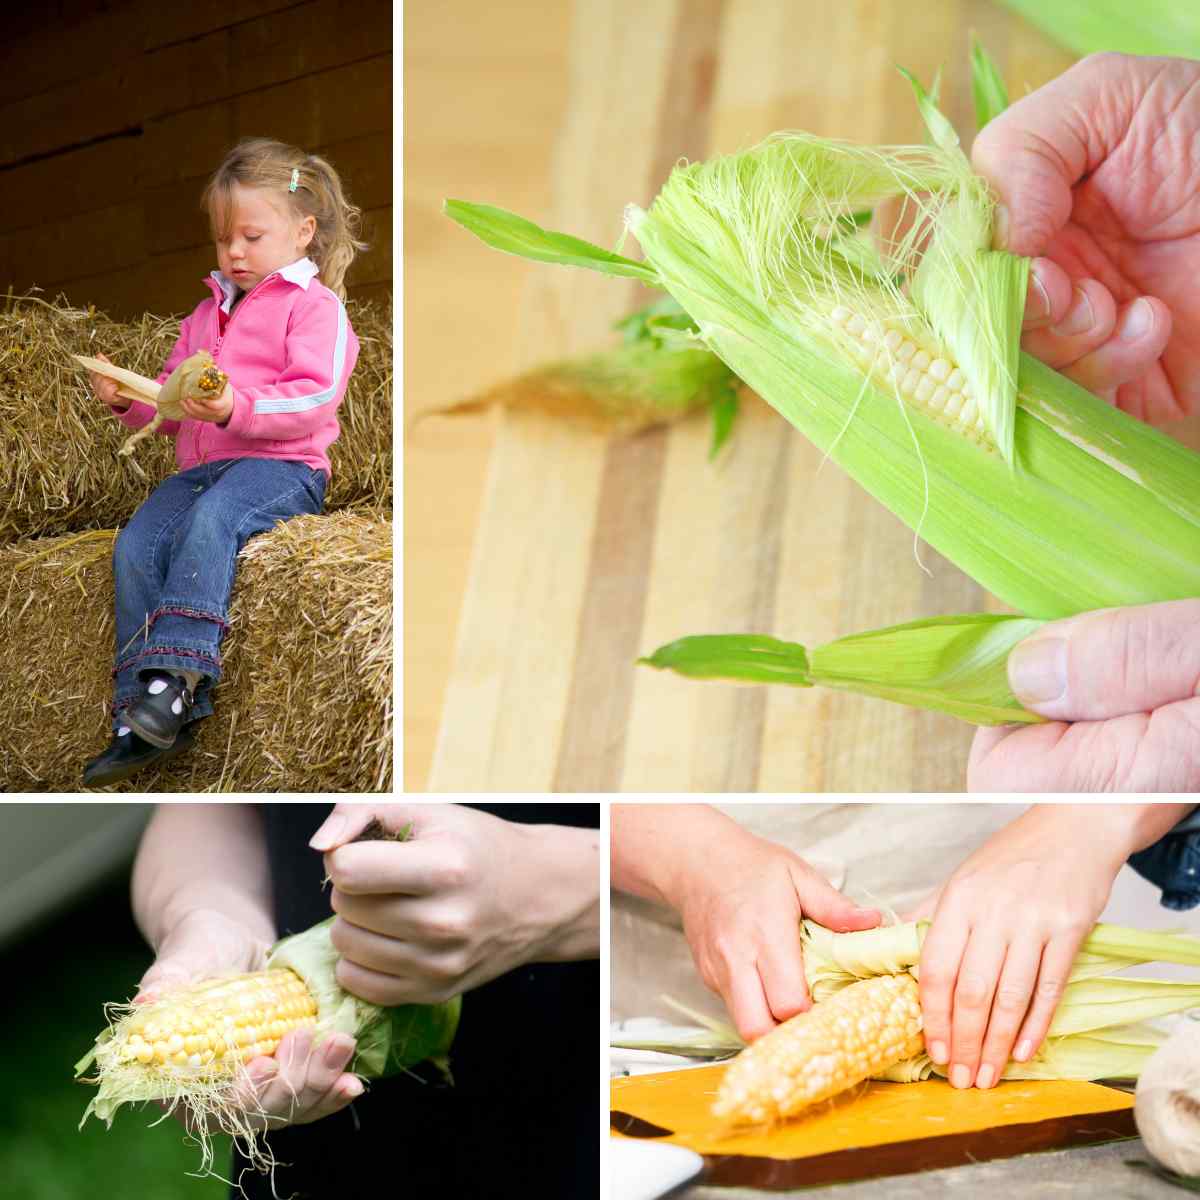 Four images on a grid, of a child shucking corn, and of hands peeling back the sheath on picked corn to reveal the kernels beneath, as part of a blog about harvesting sweetcorn with children